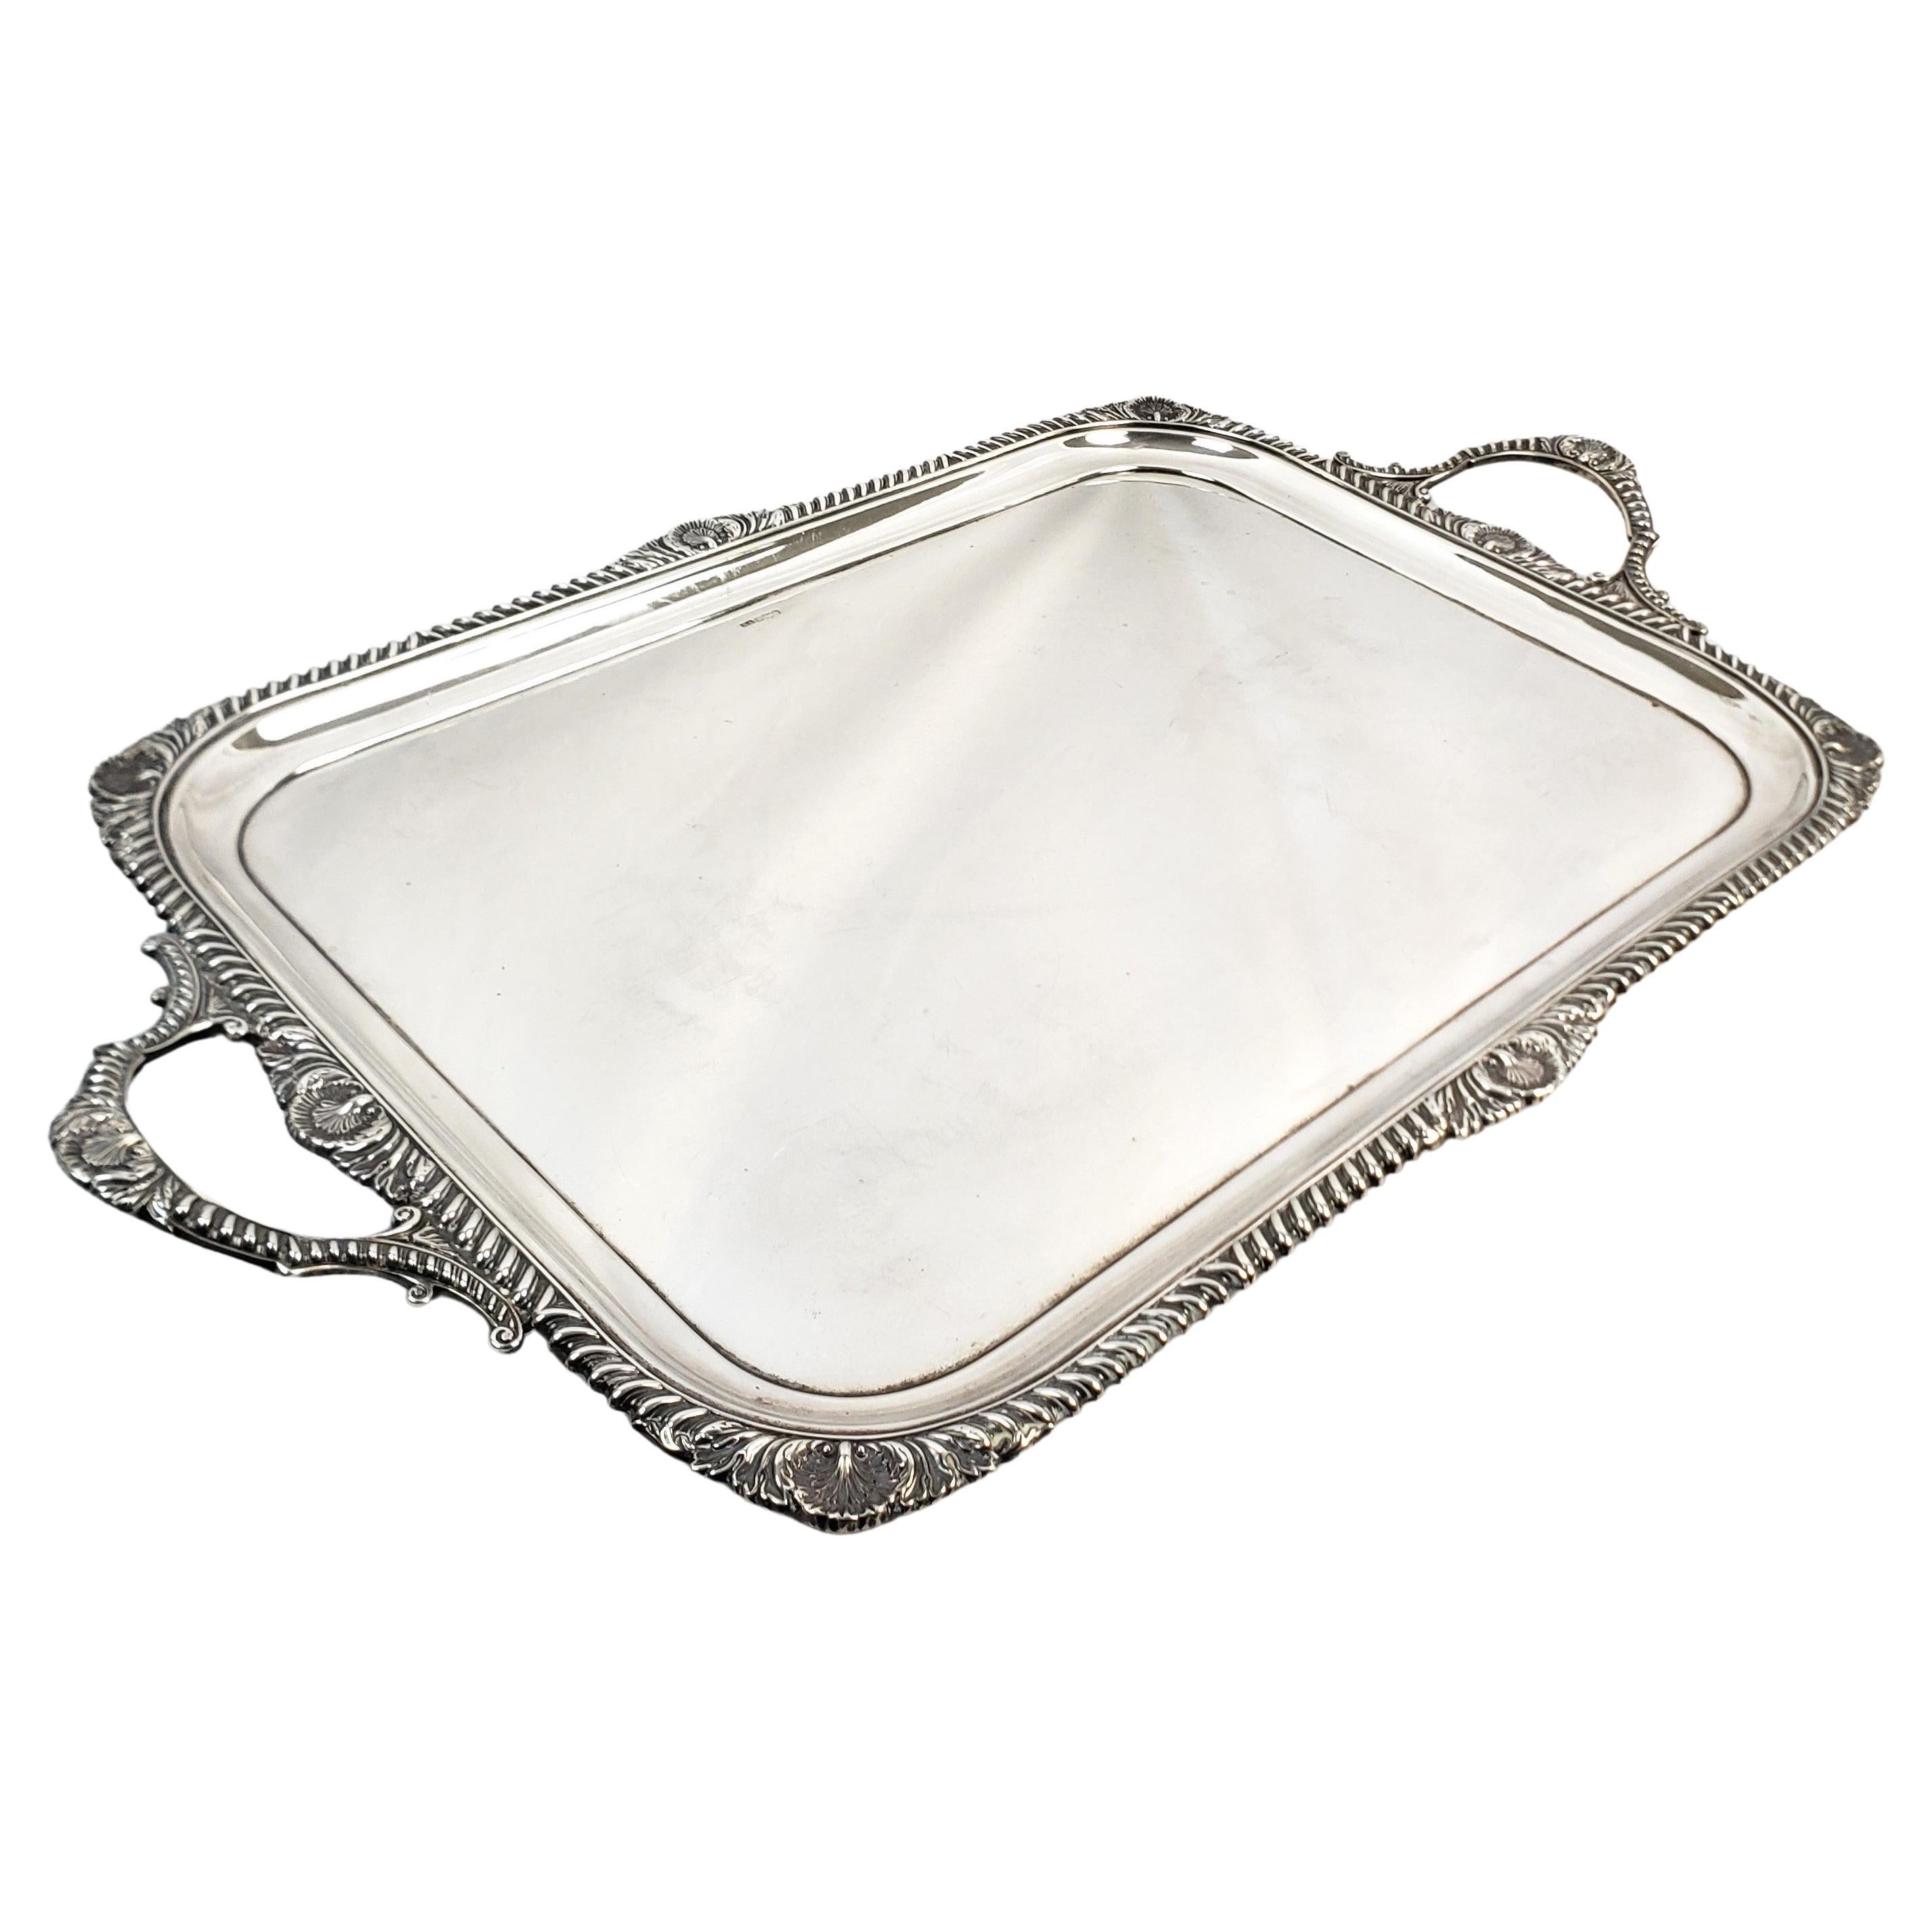 Large Antique Sterling Silver Edwardian Serving Tray with Stylized Rope Border For Sale